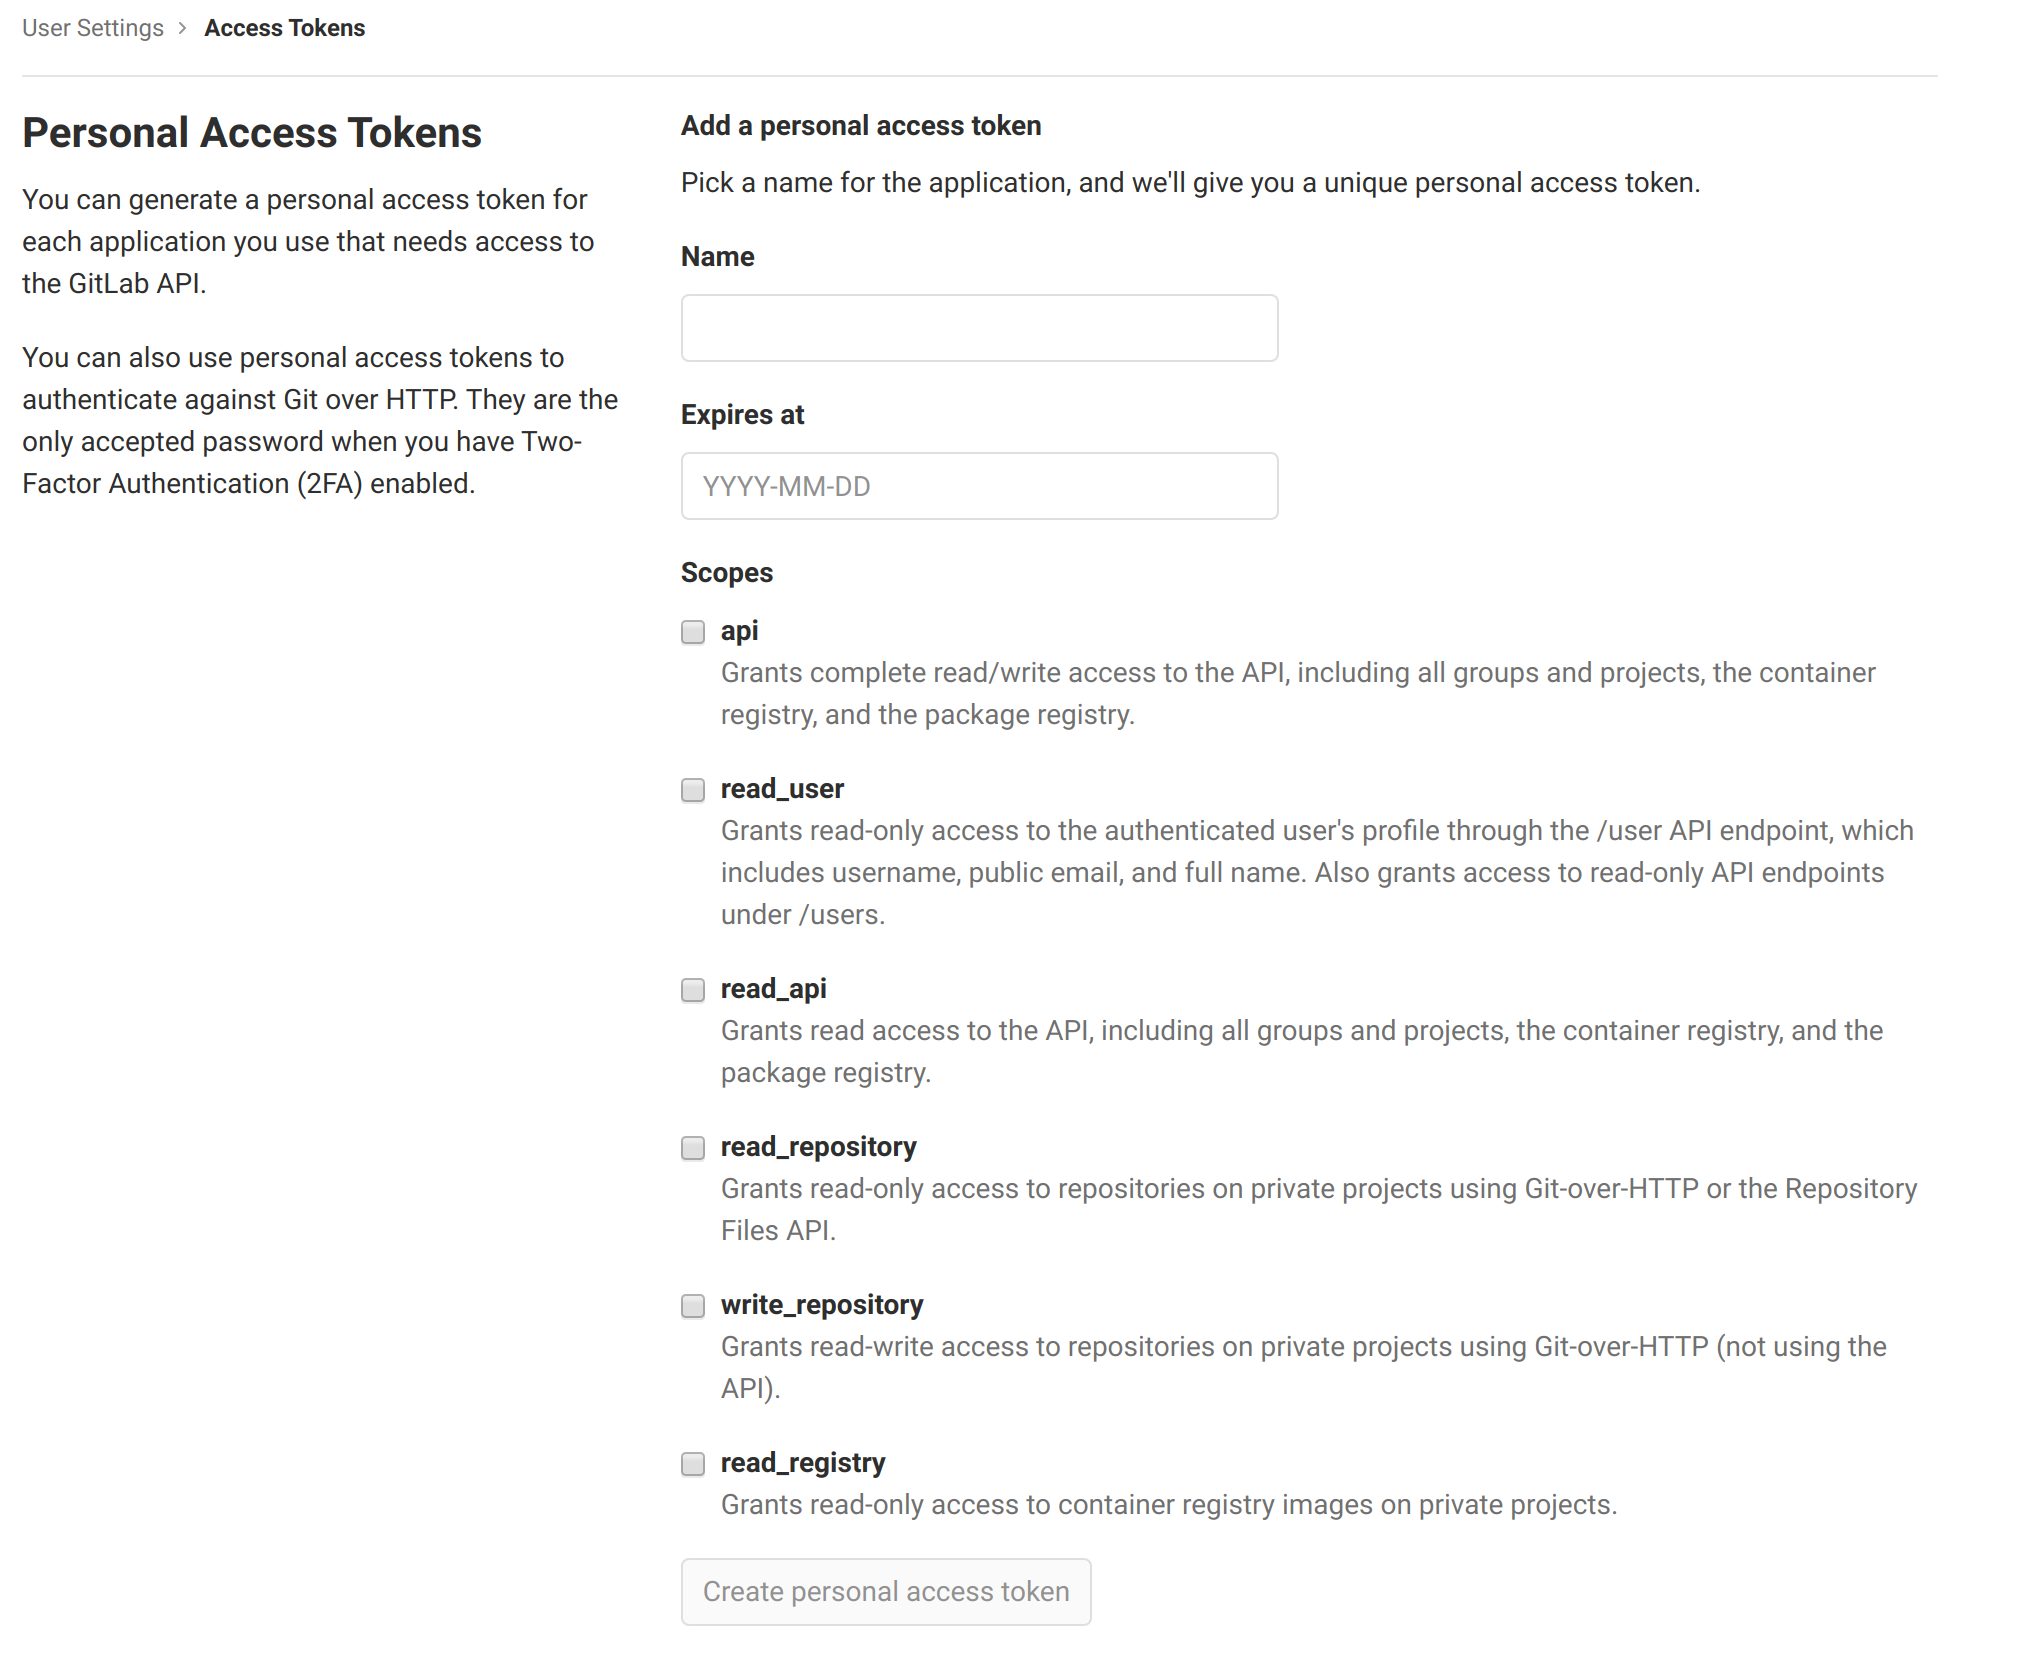 Create a personal access token for GitLab, which cannot be accessed again later.